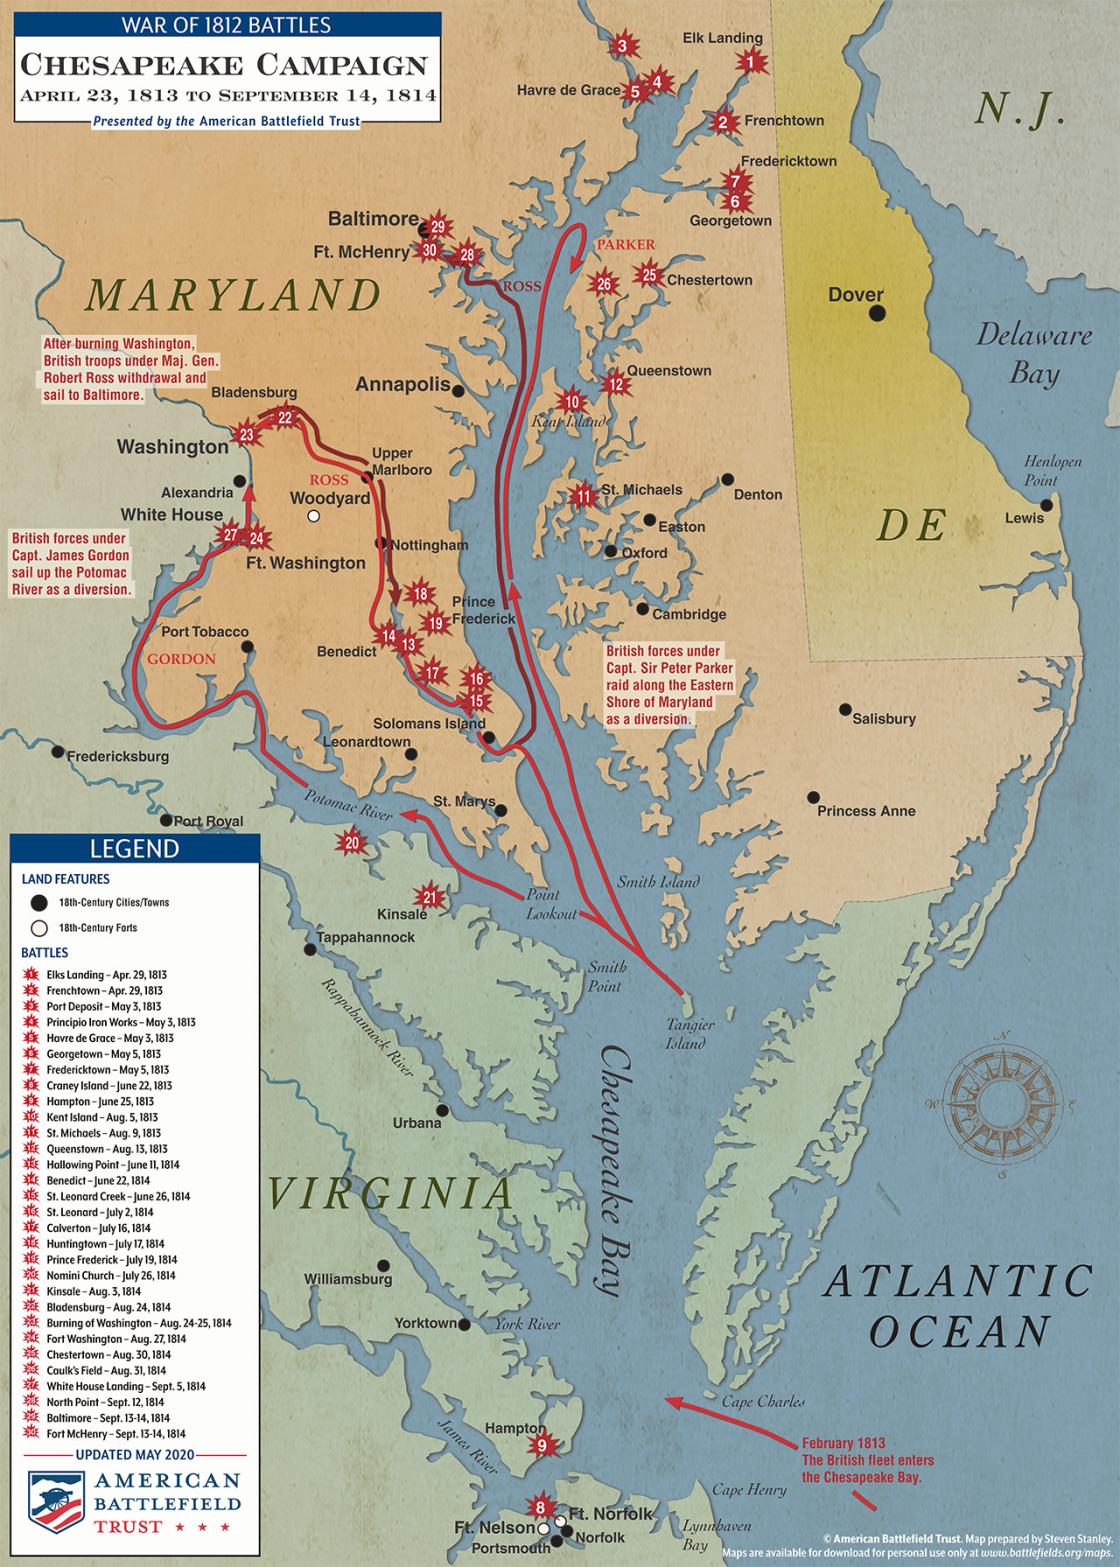 Chesapeake Campaign | Apr 23, 1813 to Sep 14, 1814 (May 2020)